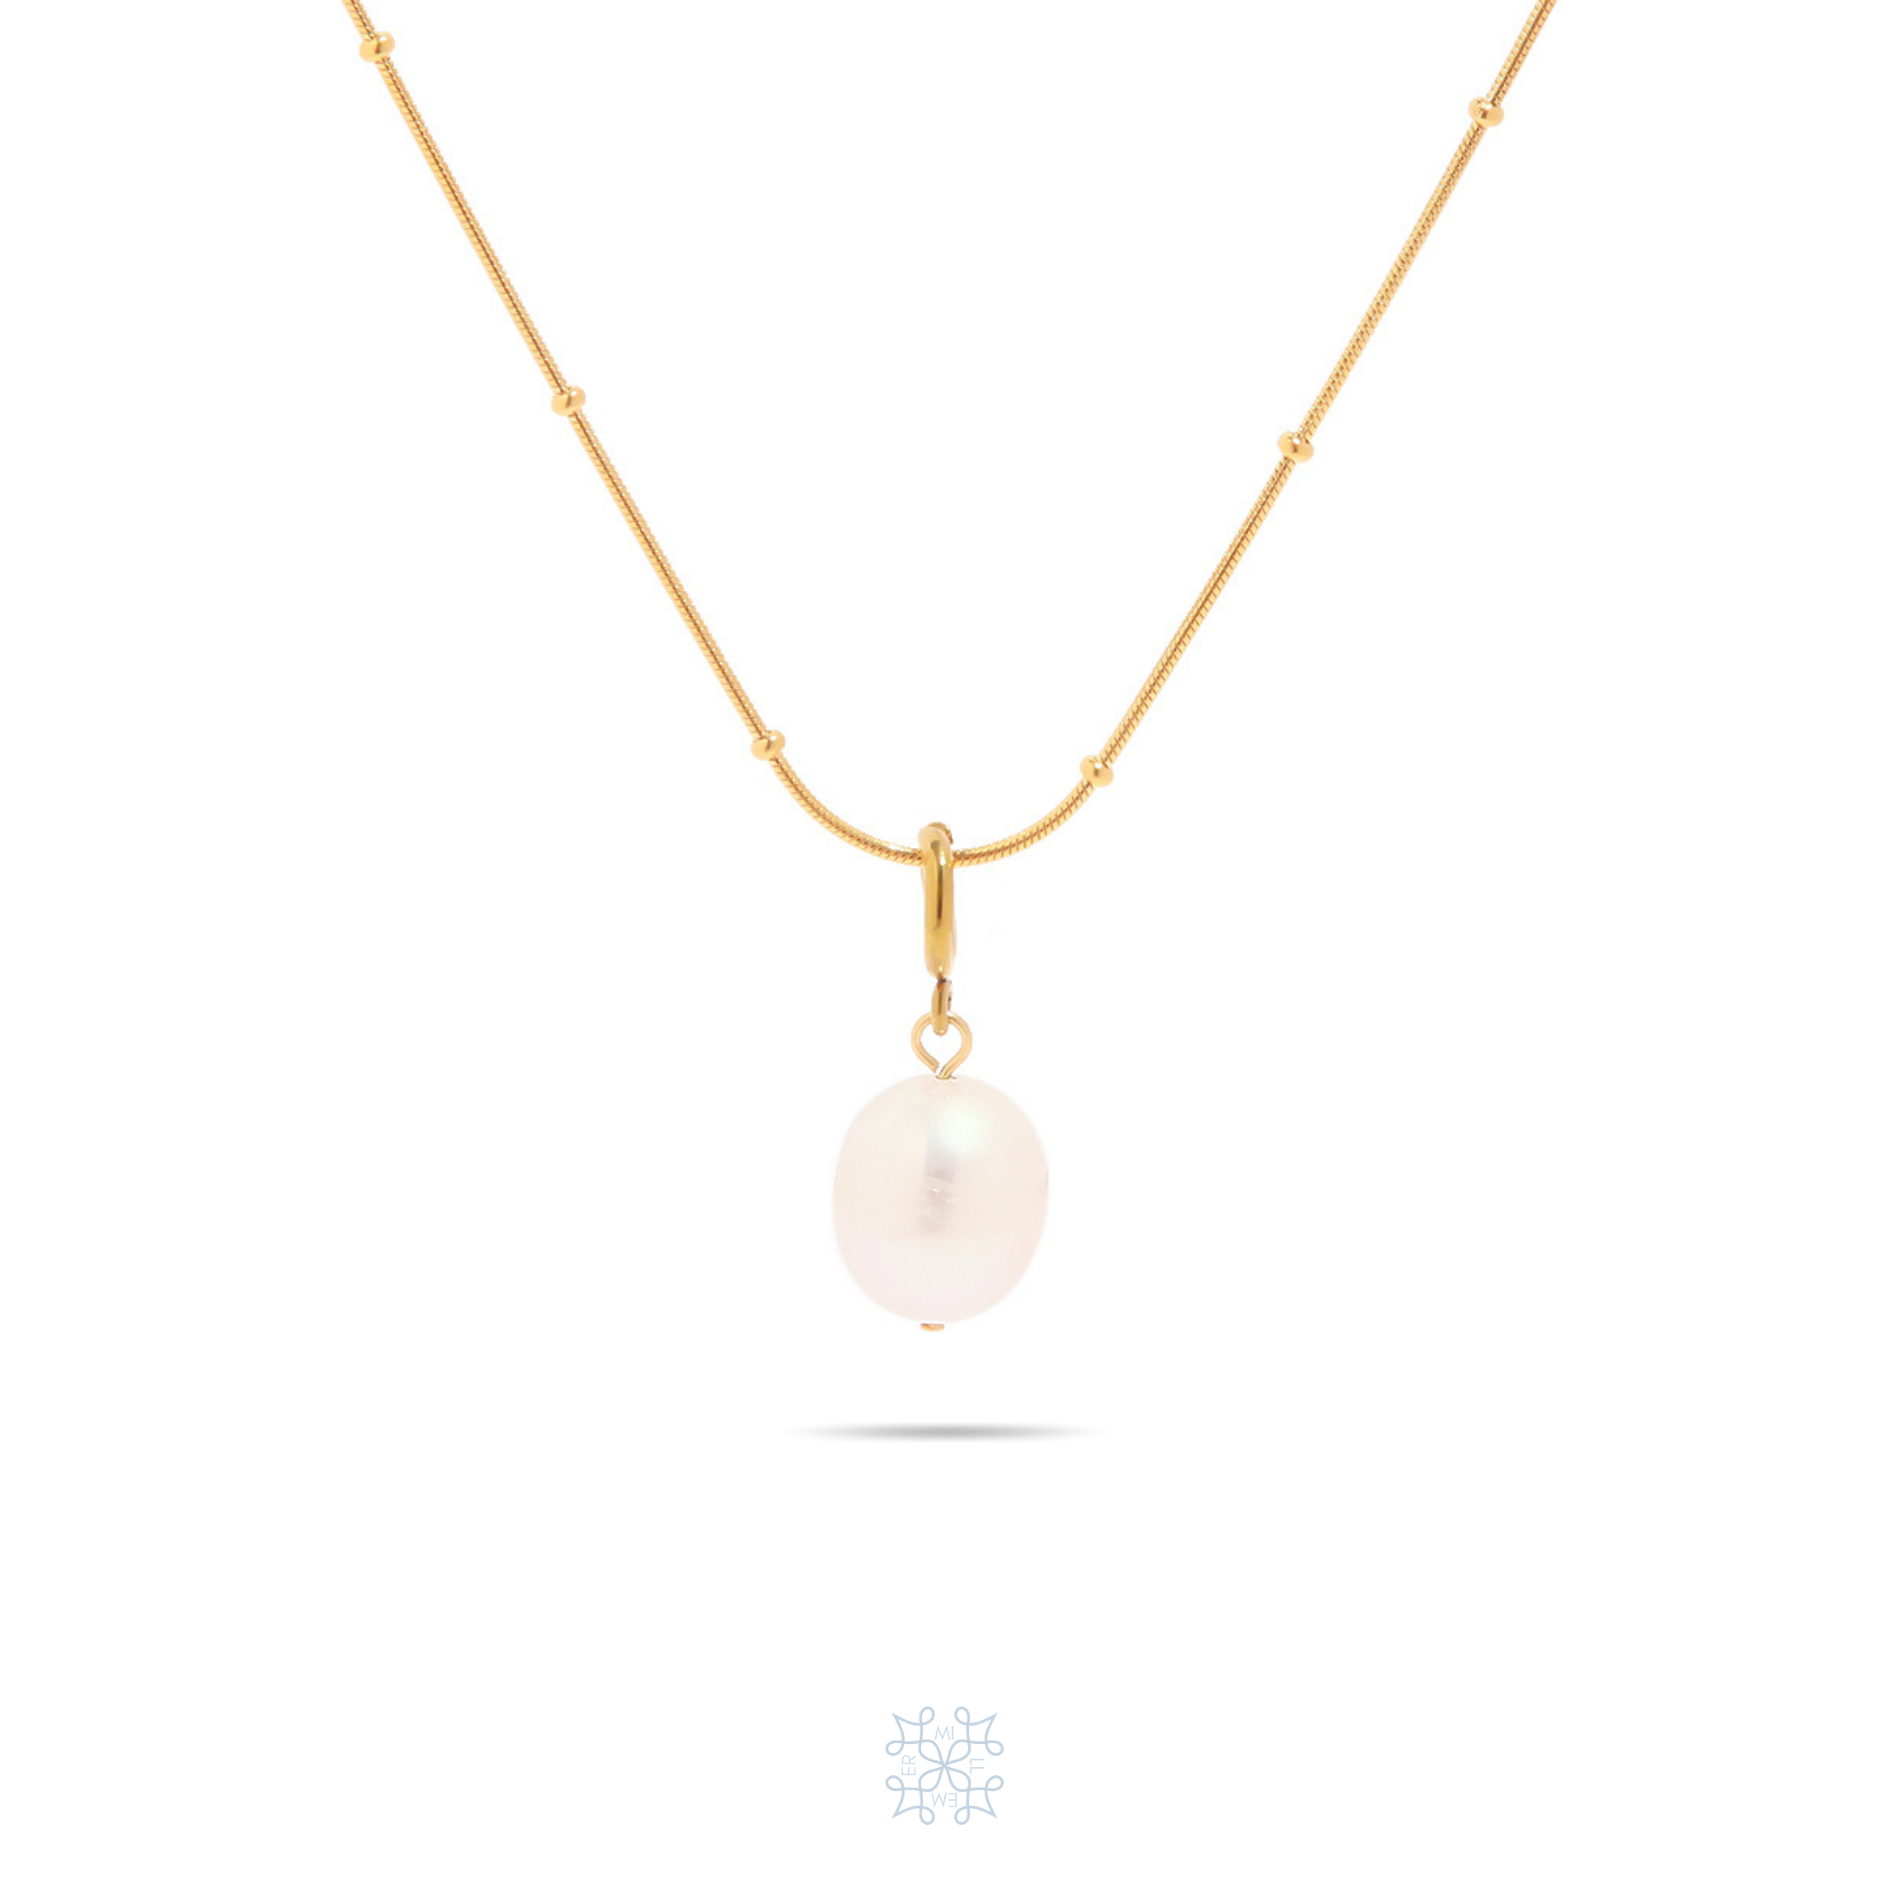 Gold chain necklace with a white pearl pendant. The chain is a dainty beaded gold waterproof chain.